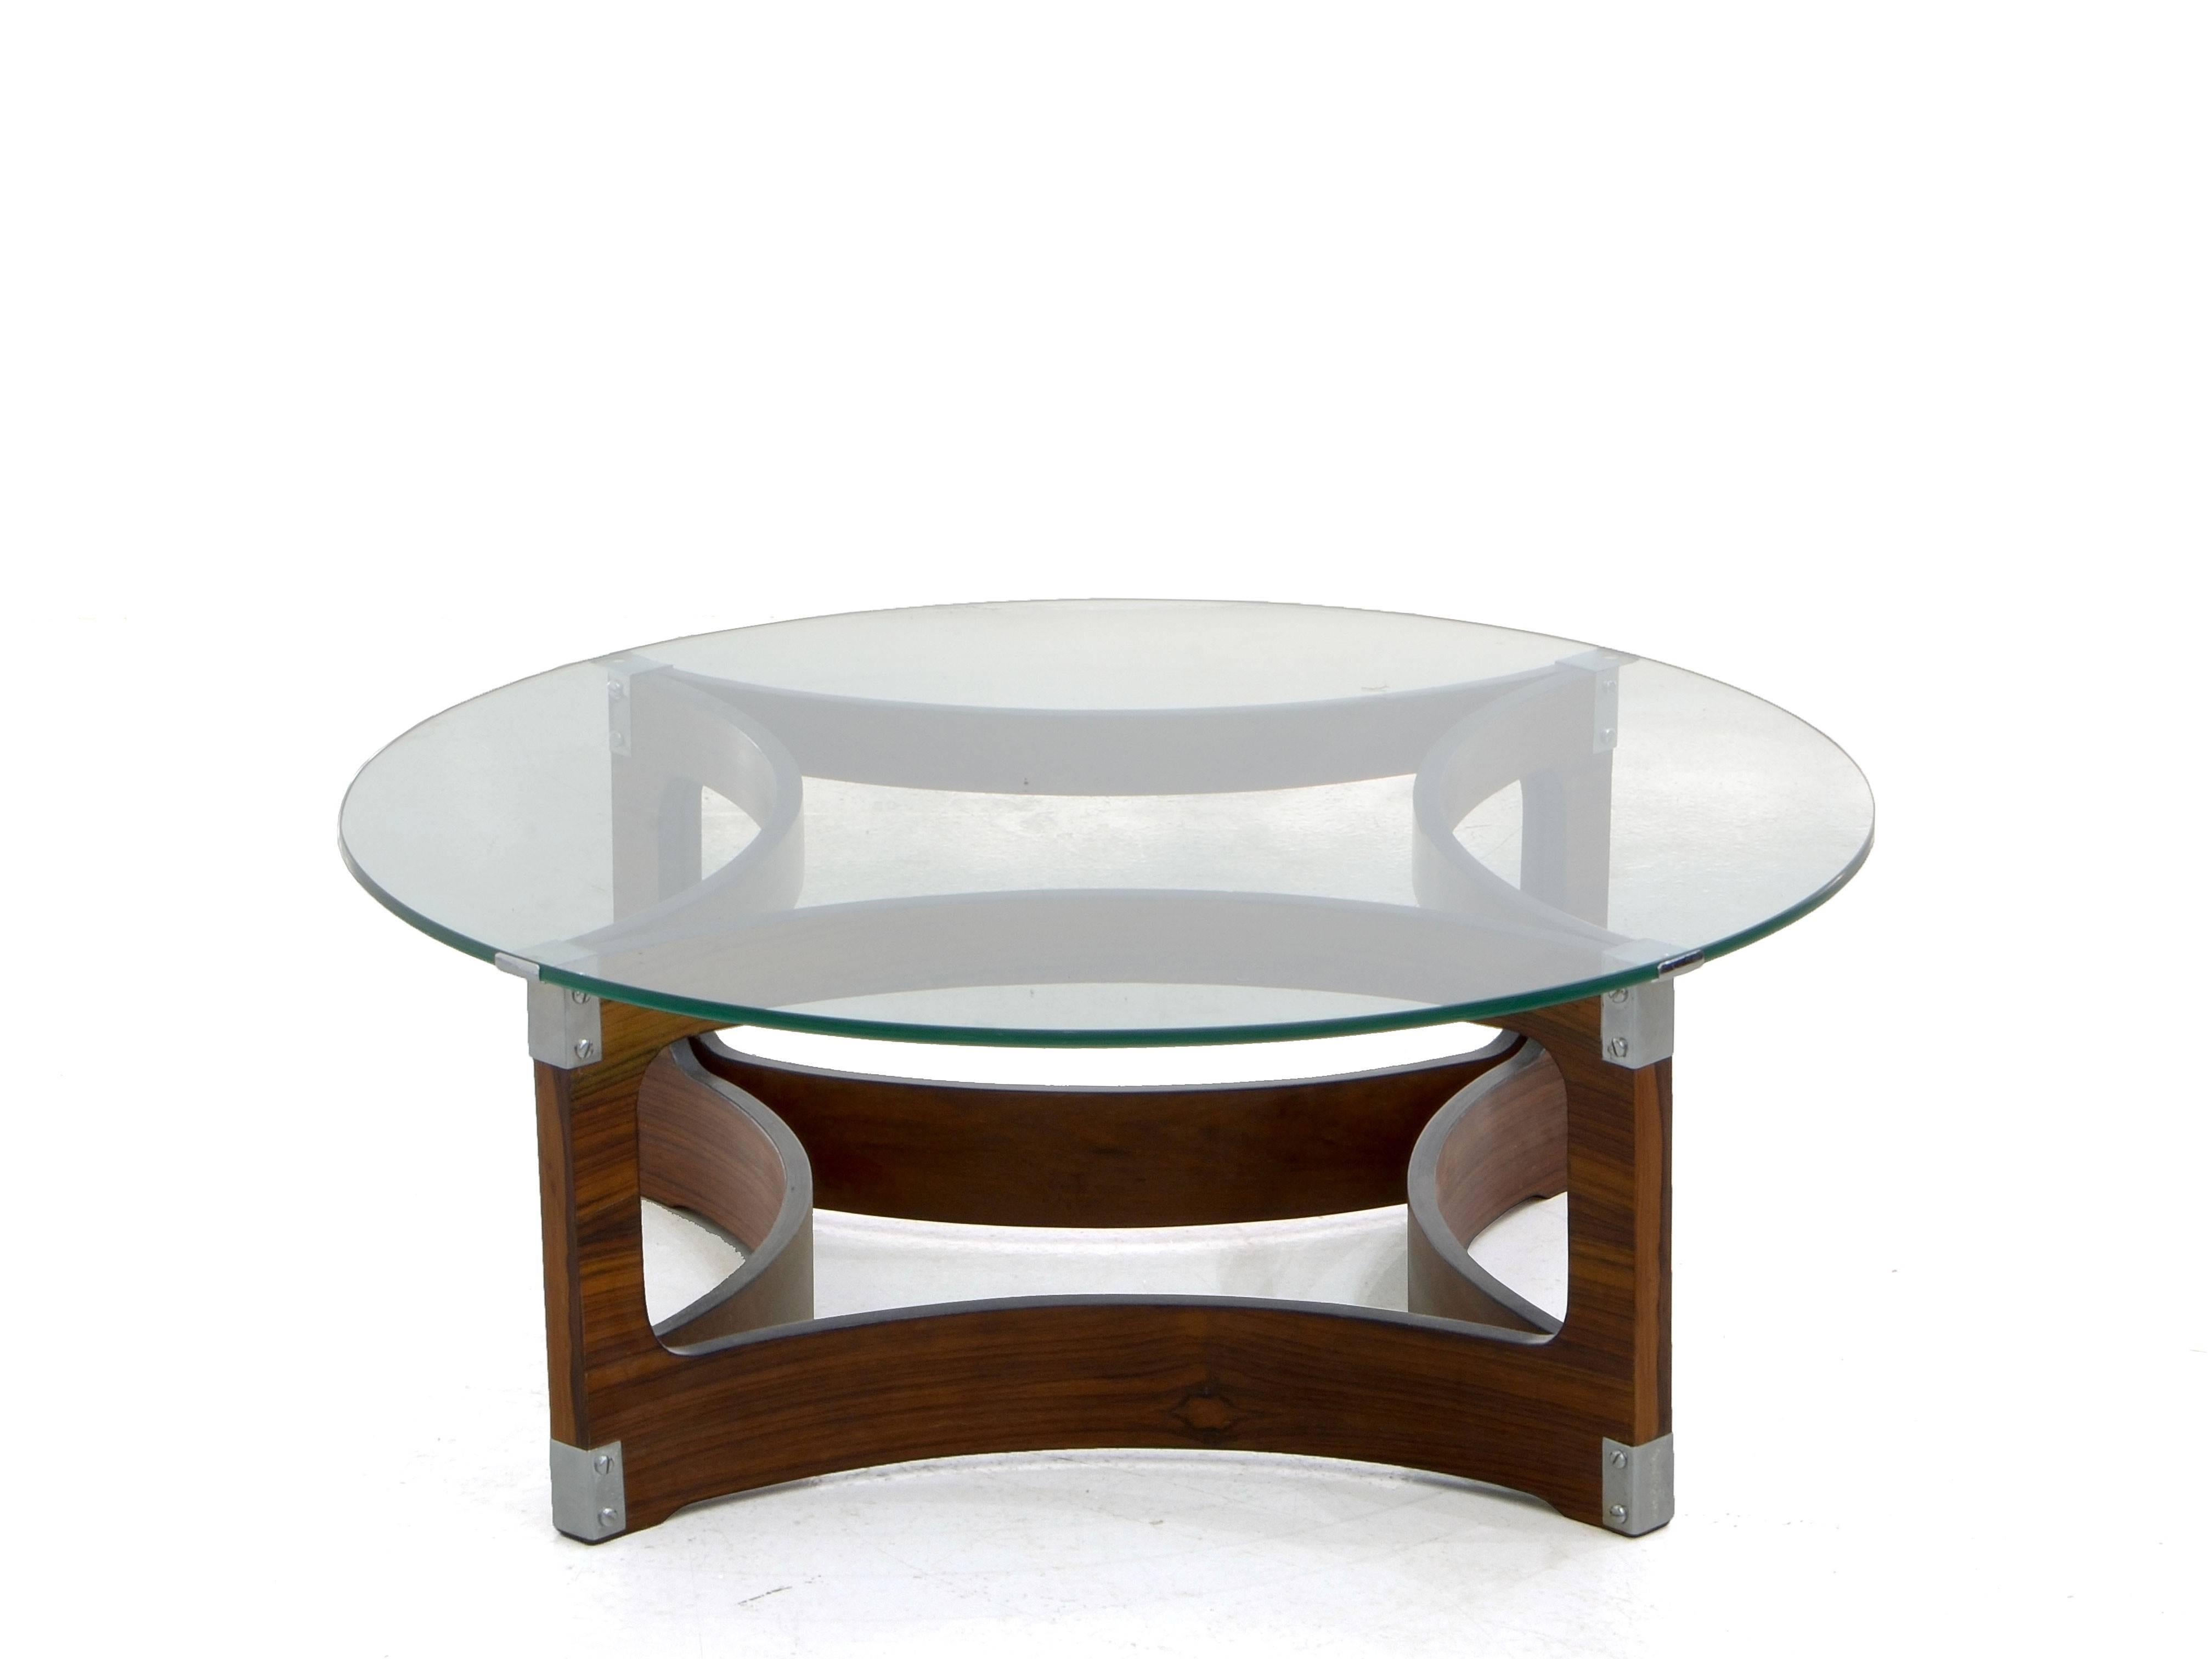 A set of two side tables and one coffee table by Jorge Zalszupin.

Originally born in Poland, Jorge Zalszupin built his entire career in Brazil, where he's absorbed many influences for his design, specially the care and attention for the treatment